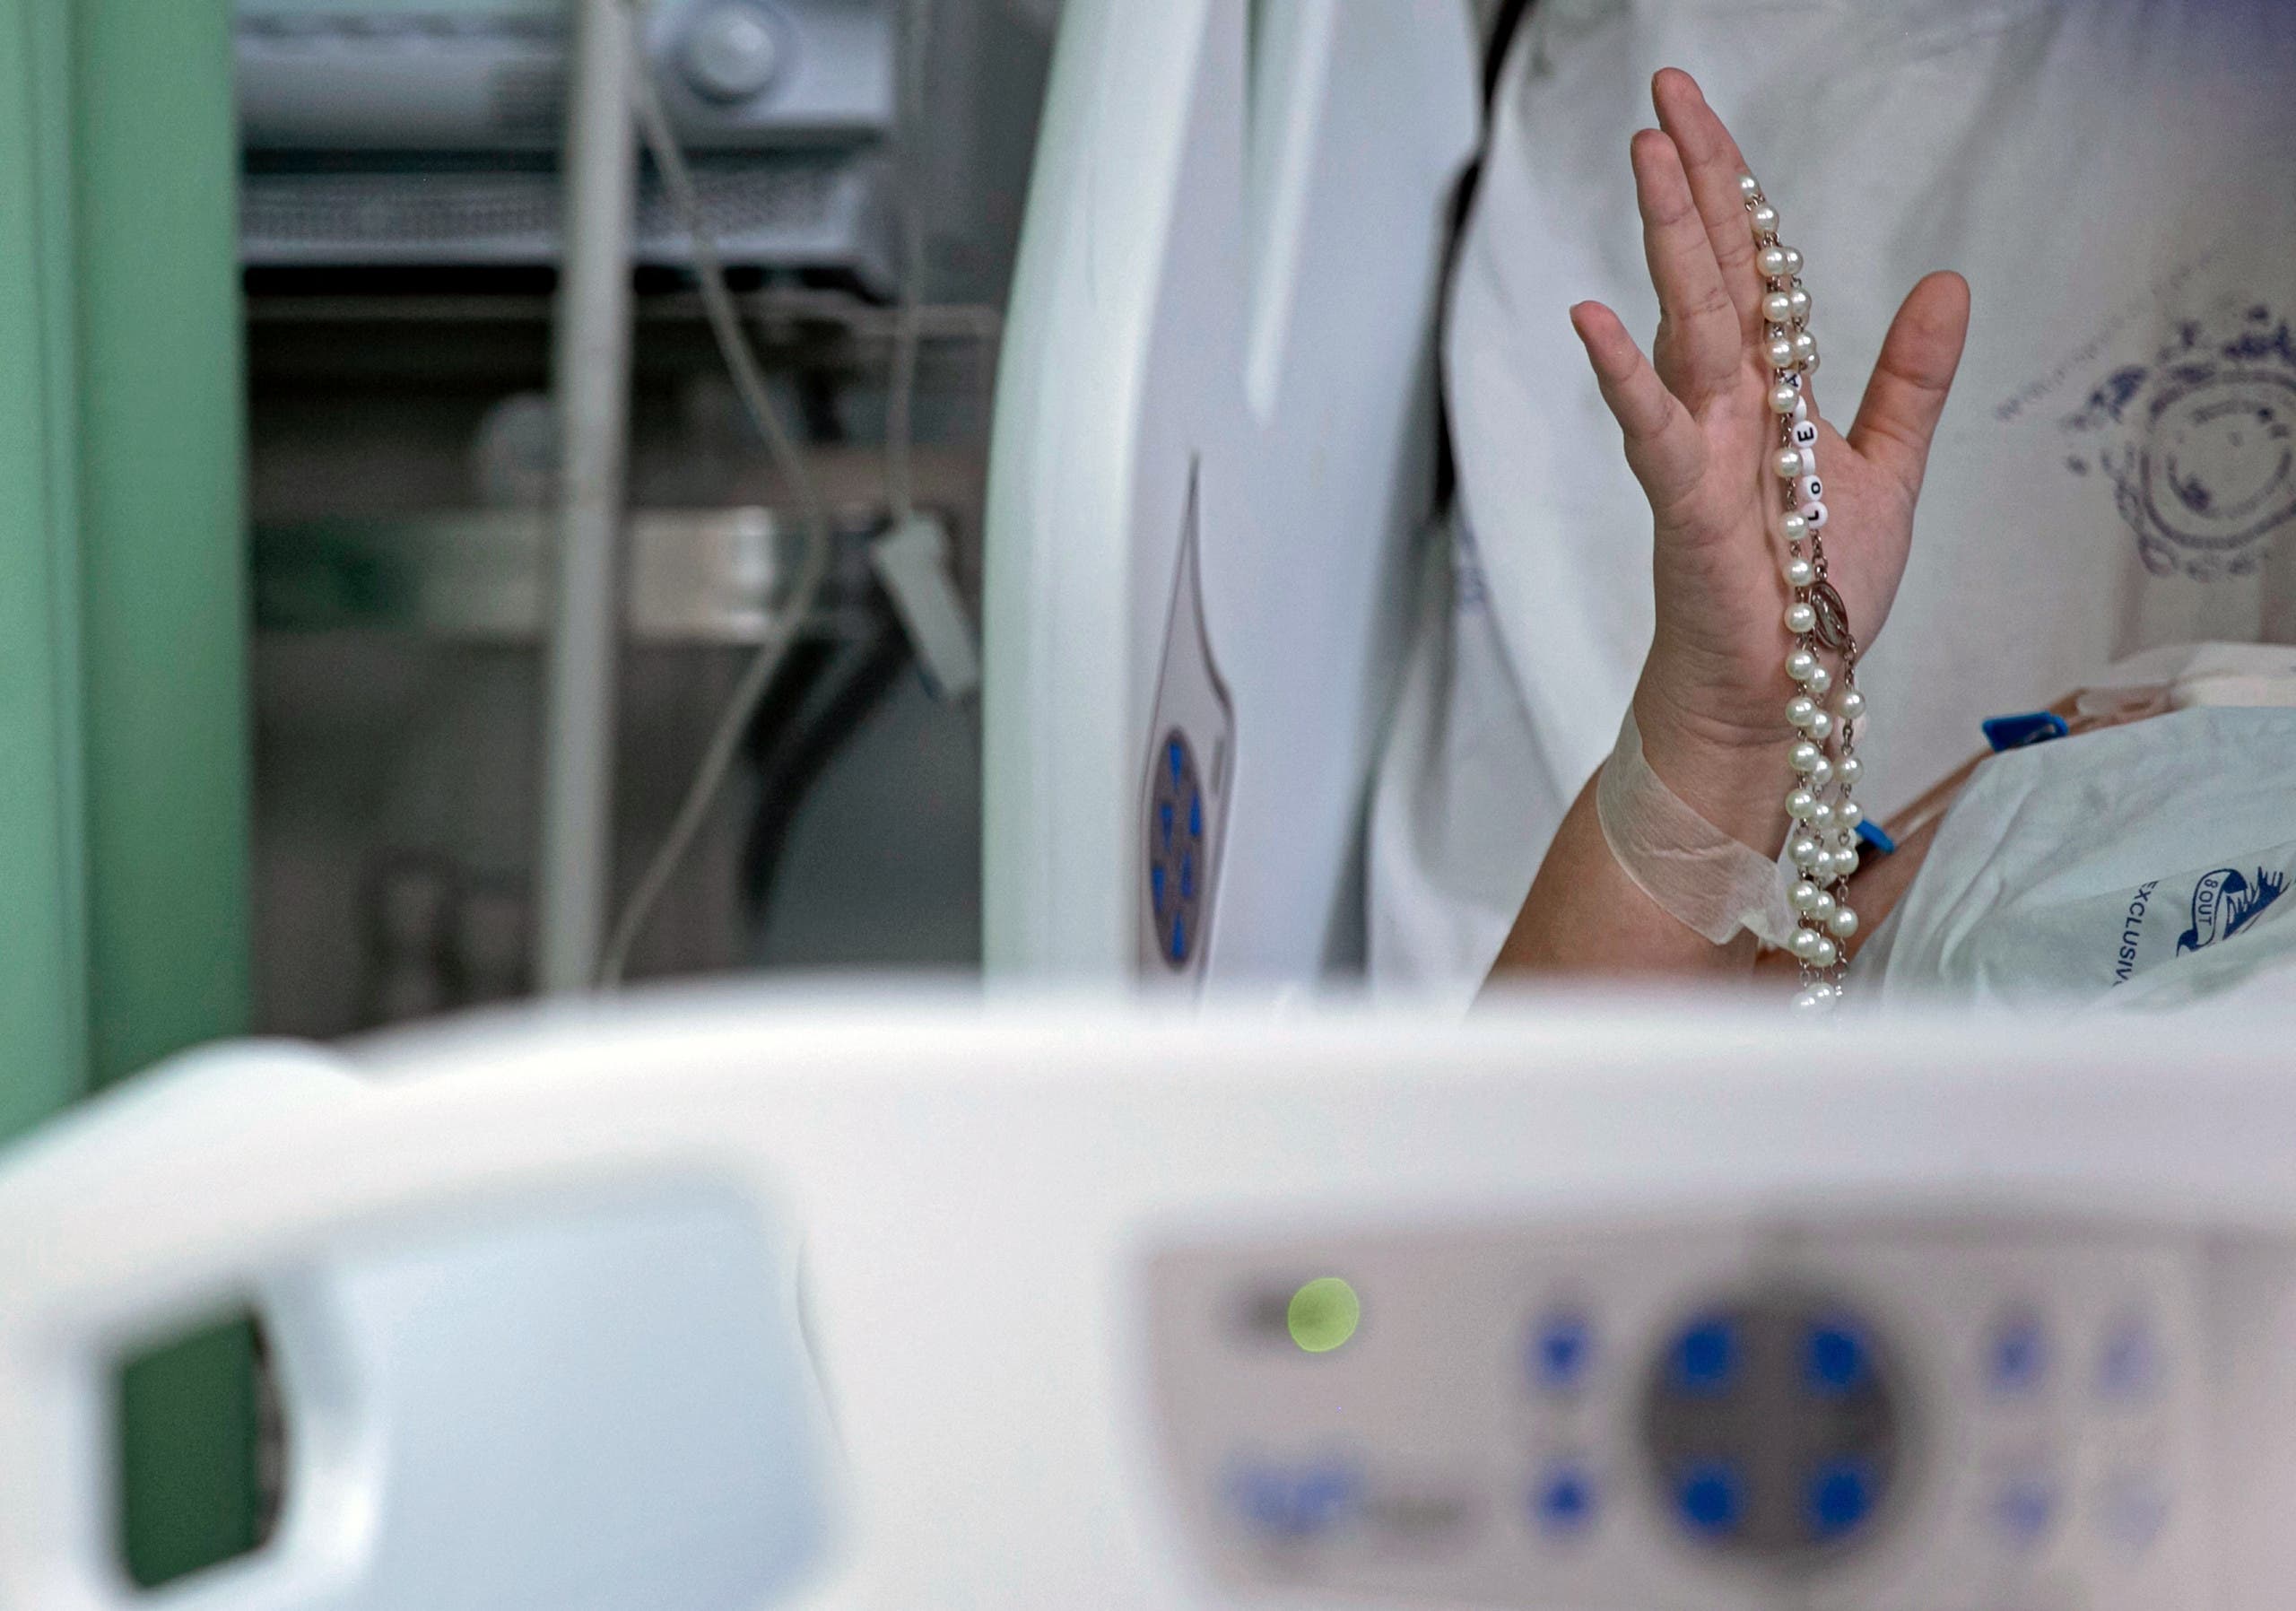 A COVID-19 patient holds up a rosary beads as health workers from the Portuguese charity hospital in Belem, state of Para, Brazil, sing and pray for COVID-19 patients inside the hospital wards and ICU areas as part of Easter celebrations on April 4, 2021. (File photo: AFP)